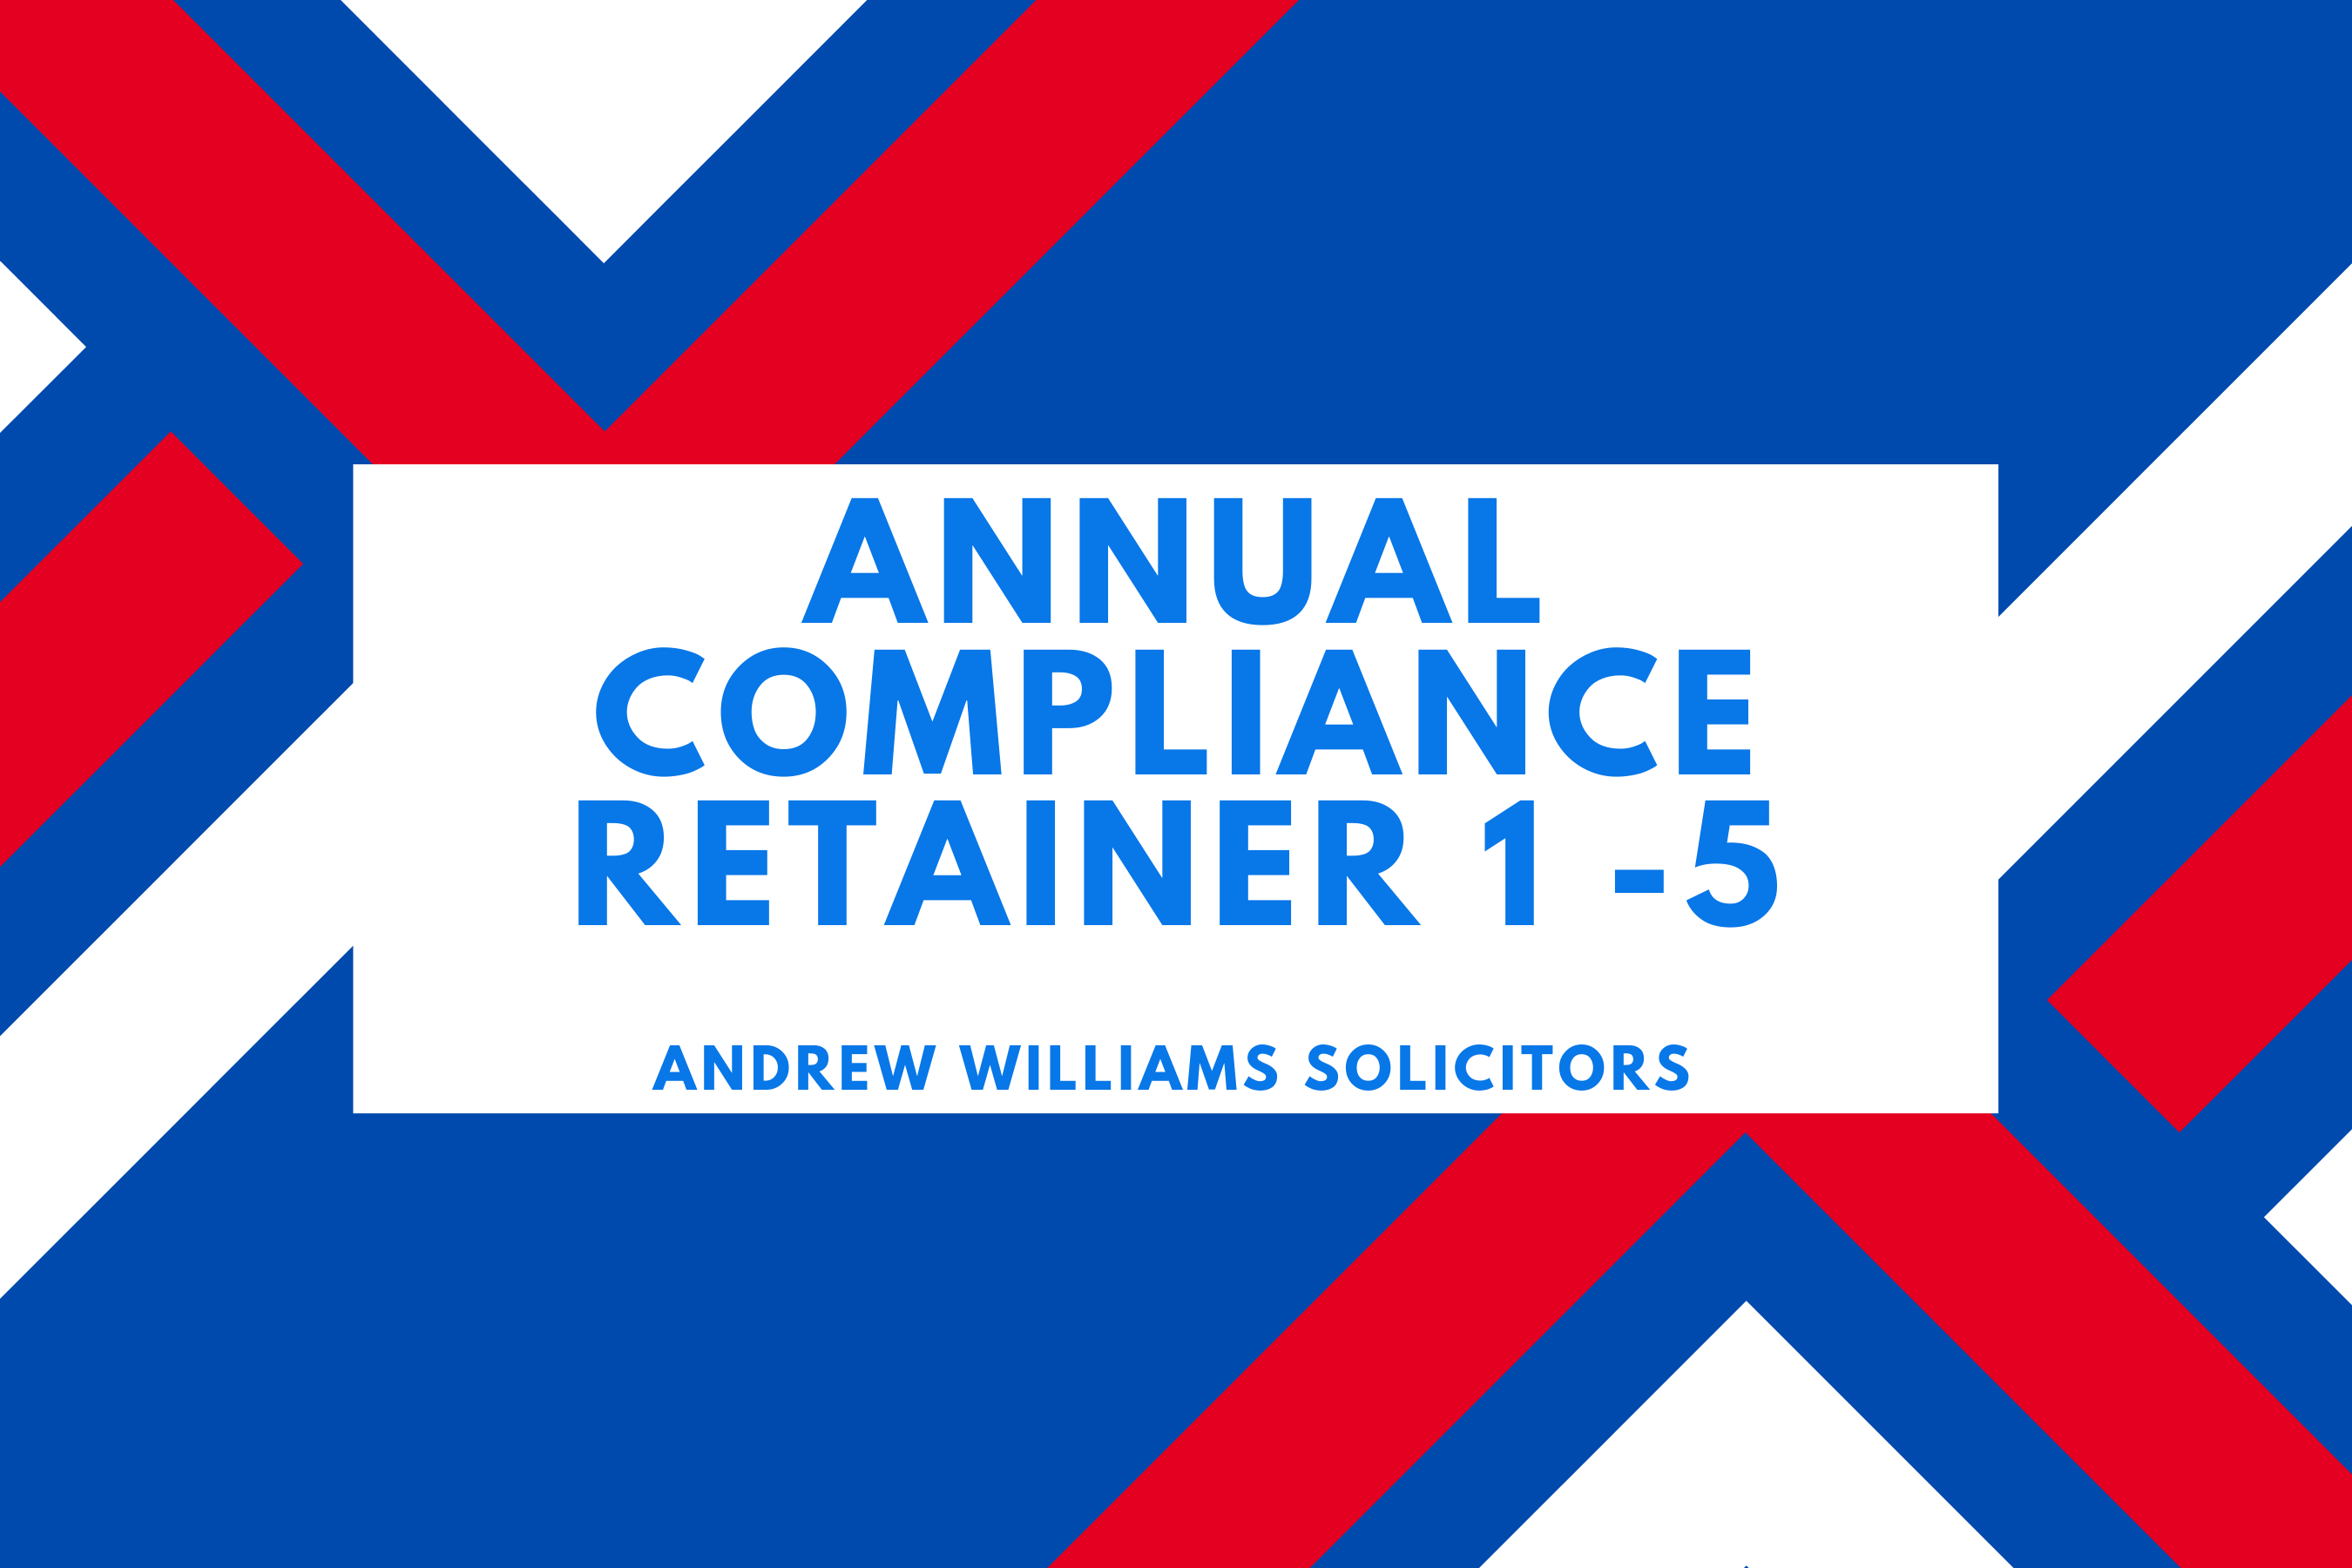 Annual Compliance Retainer 1-5